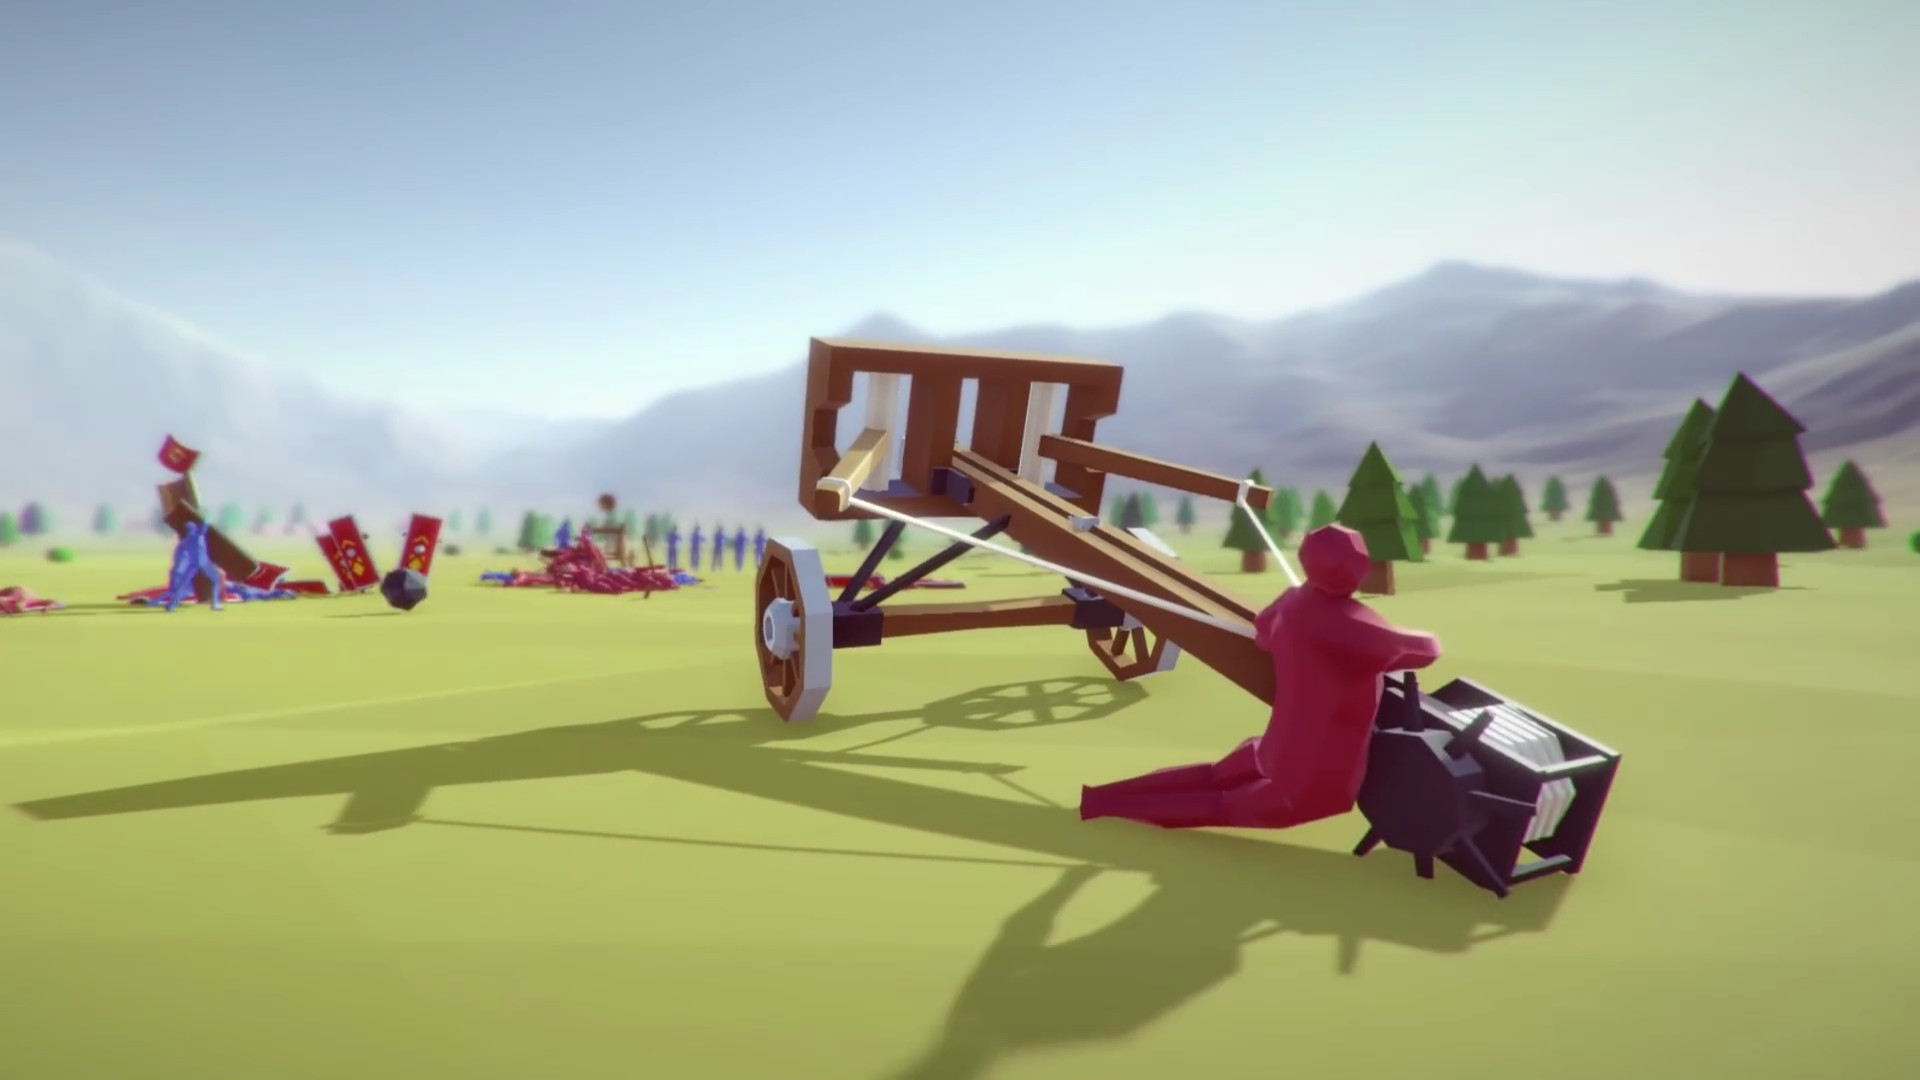 totally accurate battle simulator download for mac